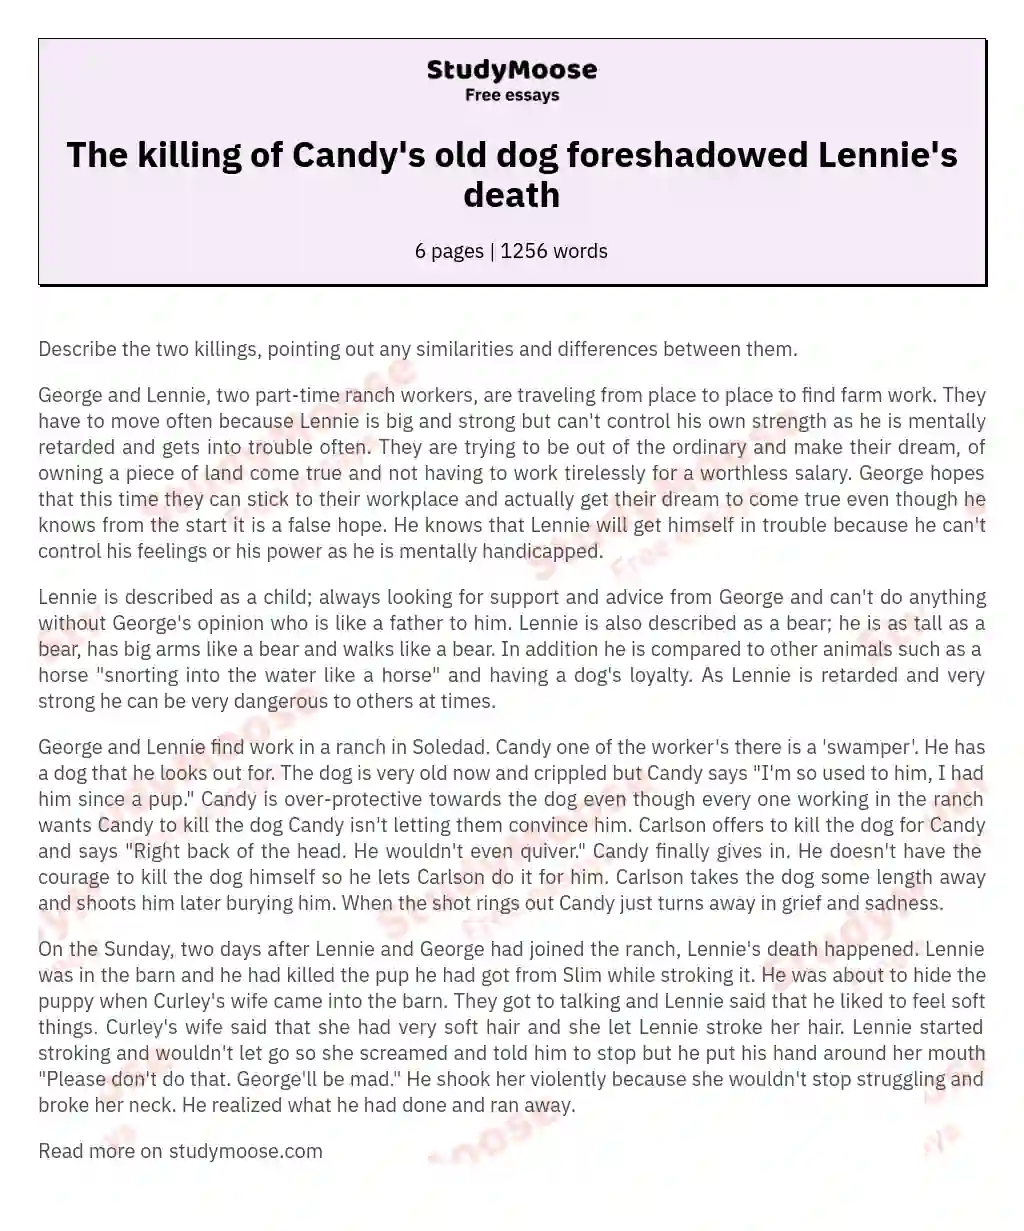 The killing of Candy's old dog foreshadowed Lennie's death essay